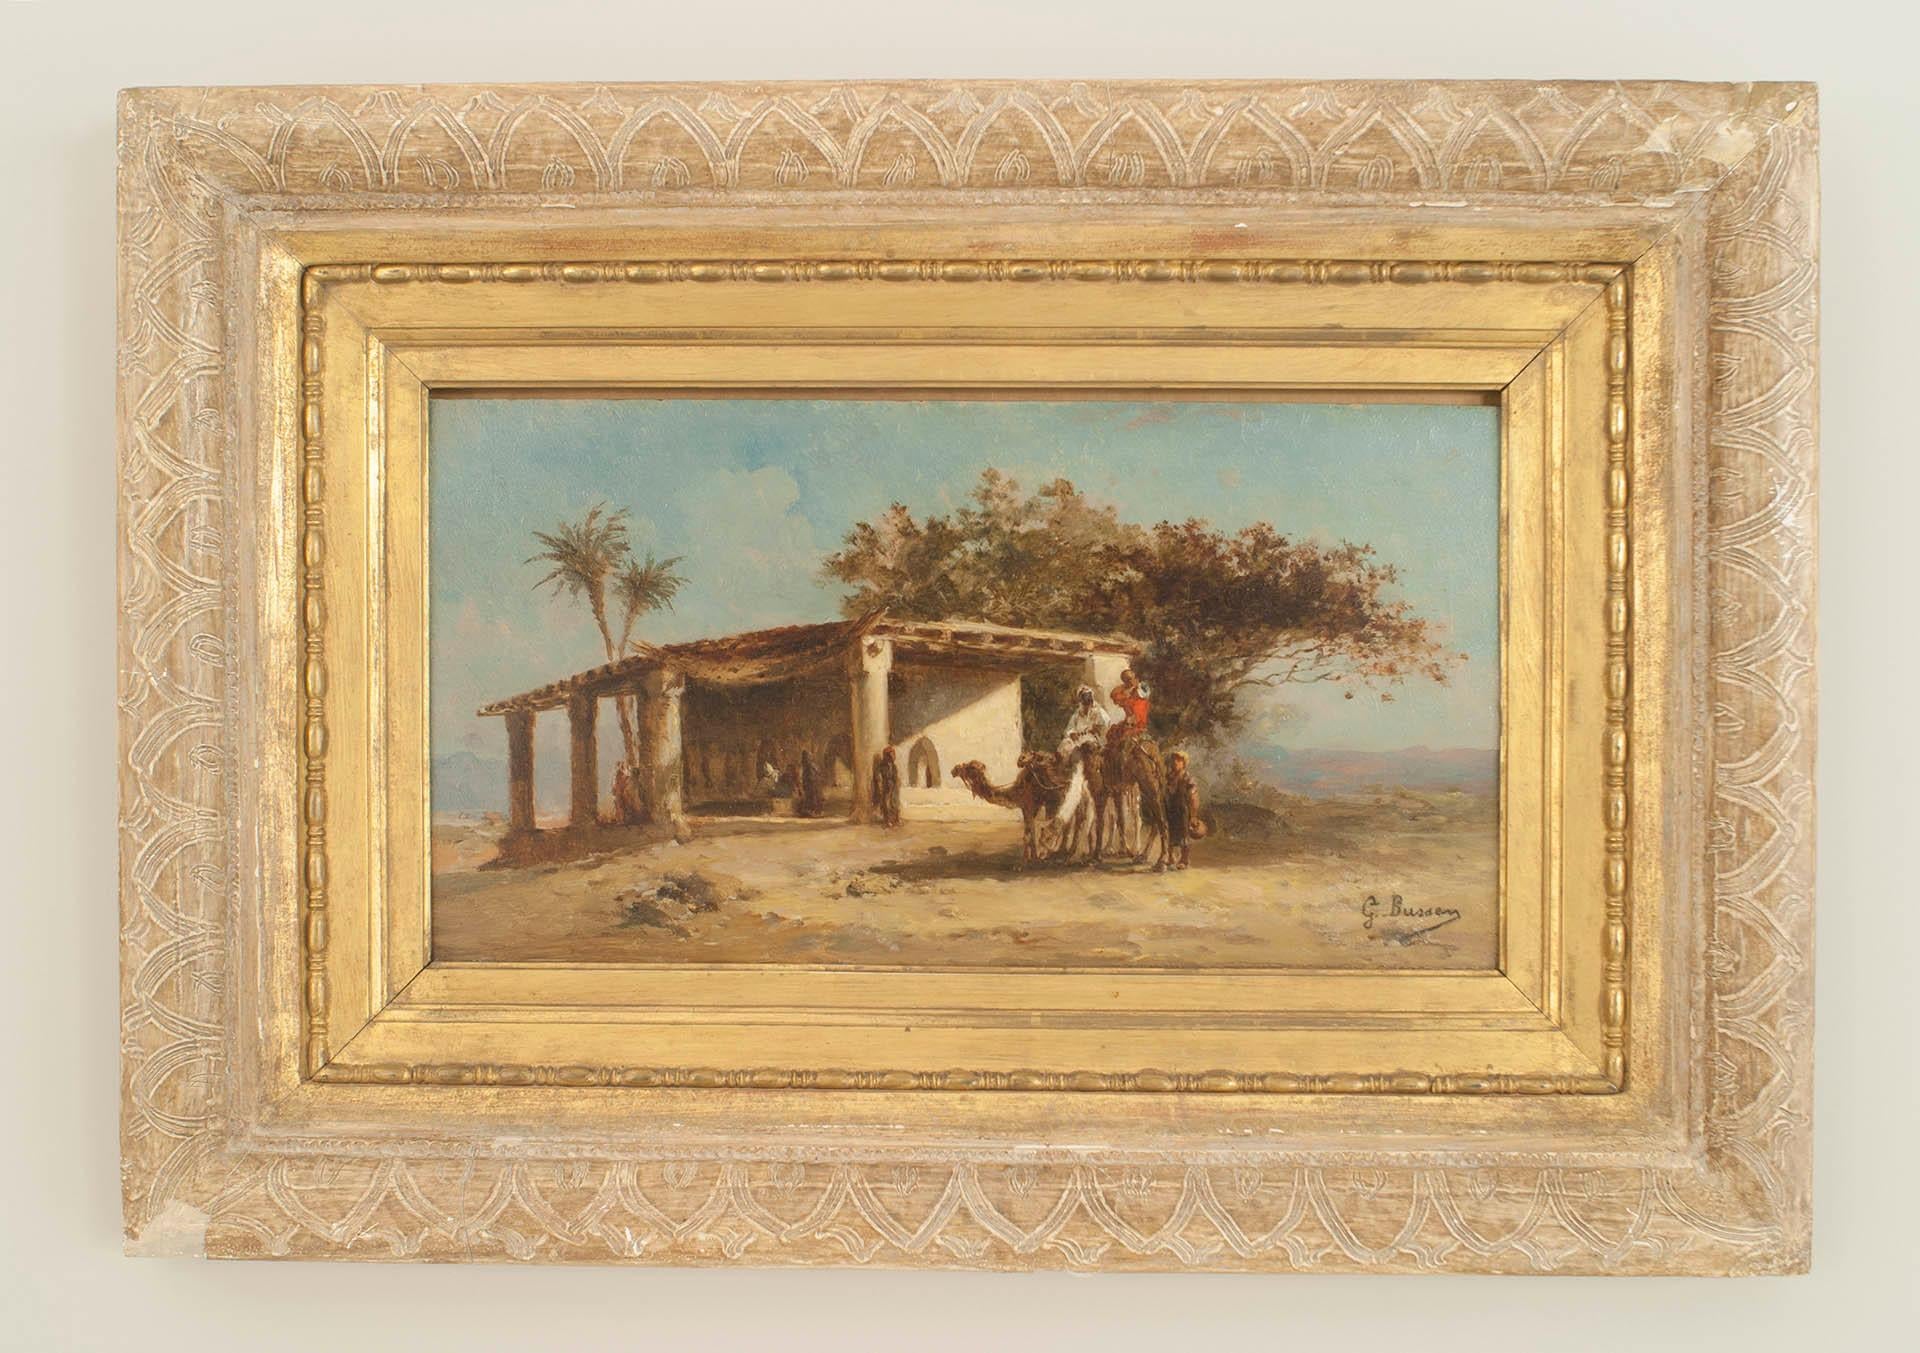 Pair of French Victorian oil painting of a Middle Eastern scene with figures and camels standing next to a building (signed: G BUSSEN).
 